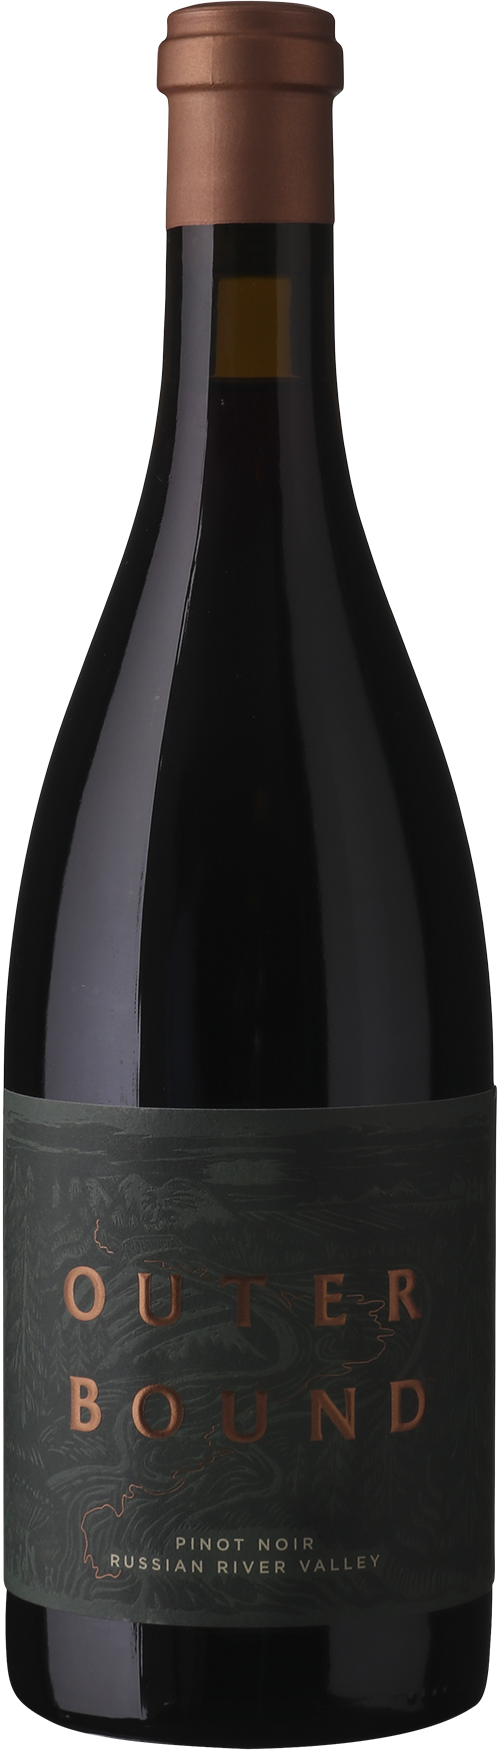 Outerbound Pinot Noir Russian River Valley 2018